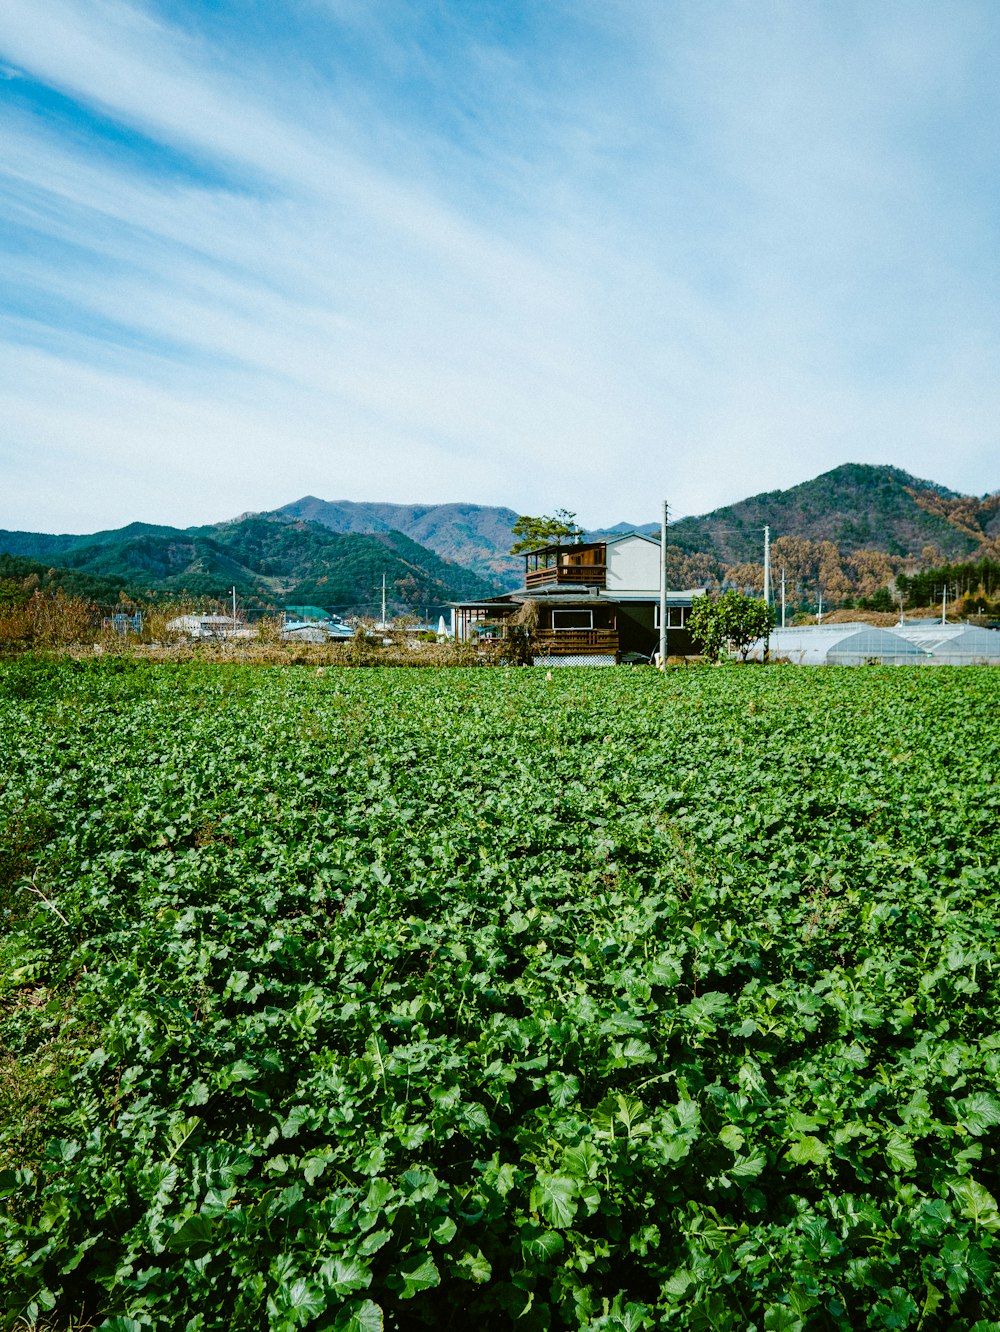 a field of green plants with mountains in the background